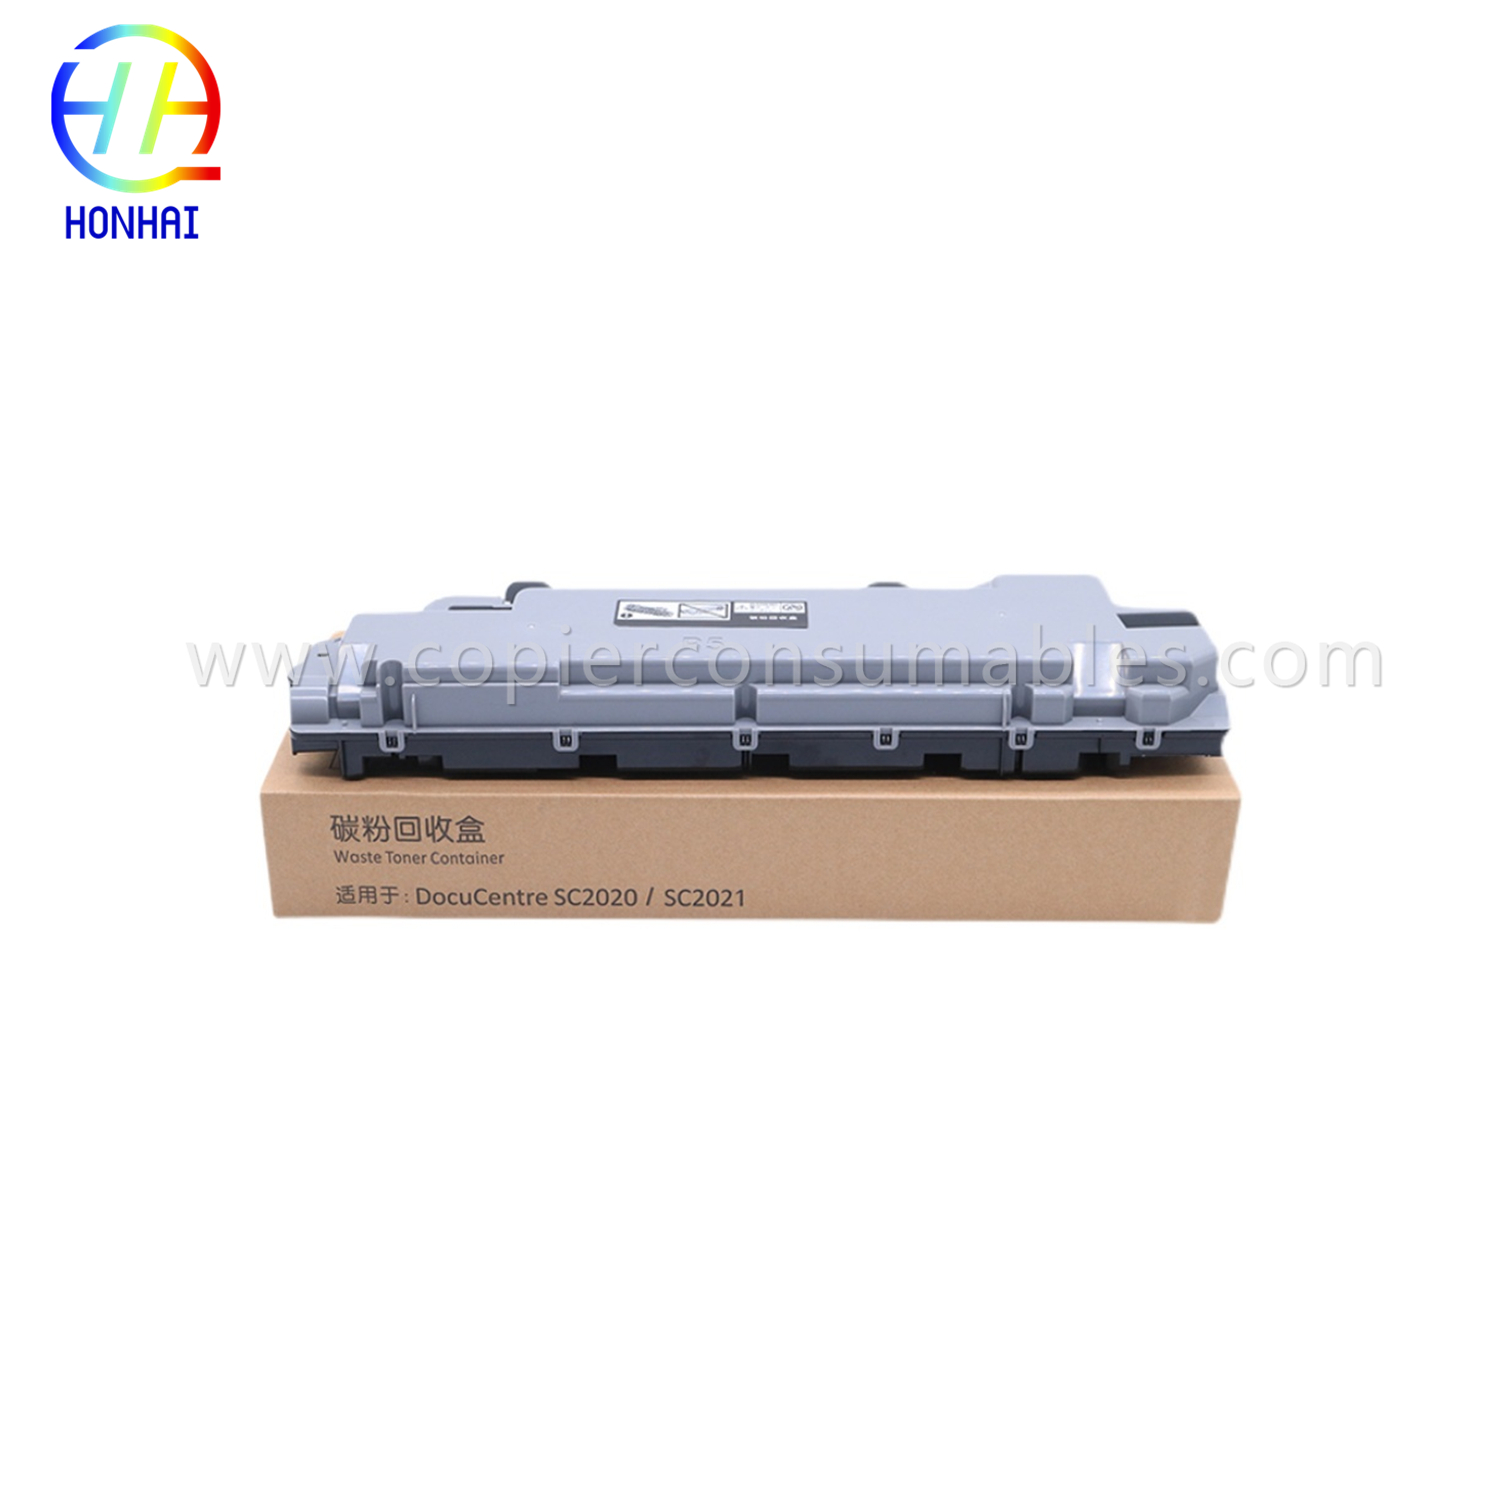 Waste Toner Container for Xerox Sc2020 Sc2021 2020 2021 (CWAA0869)  (1)